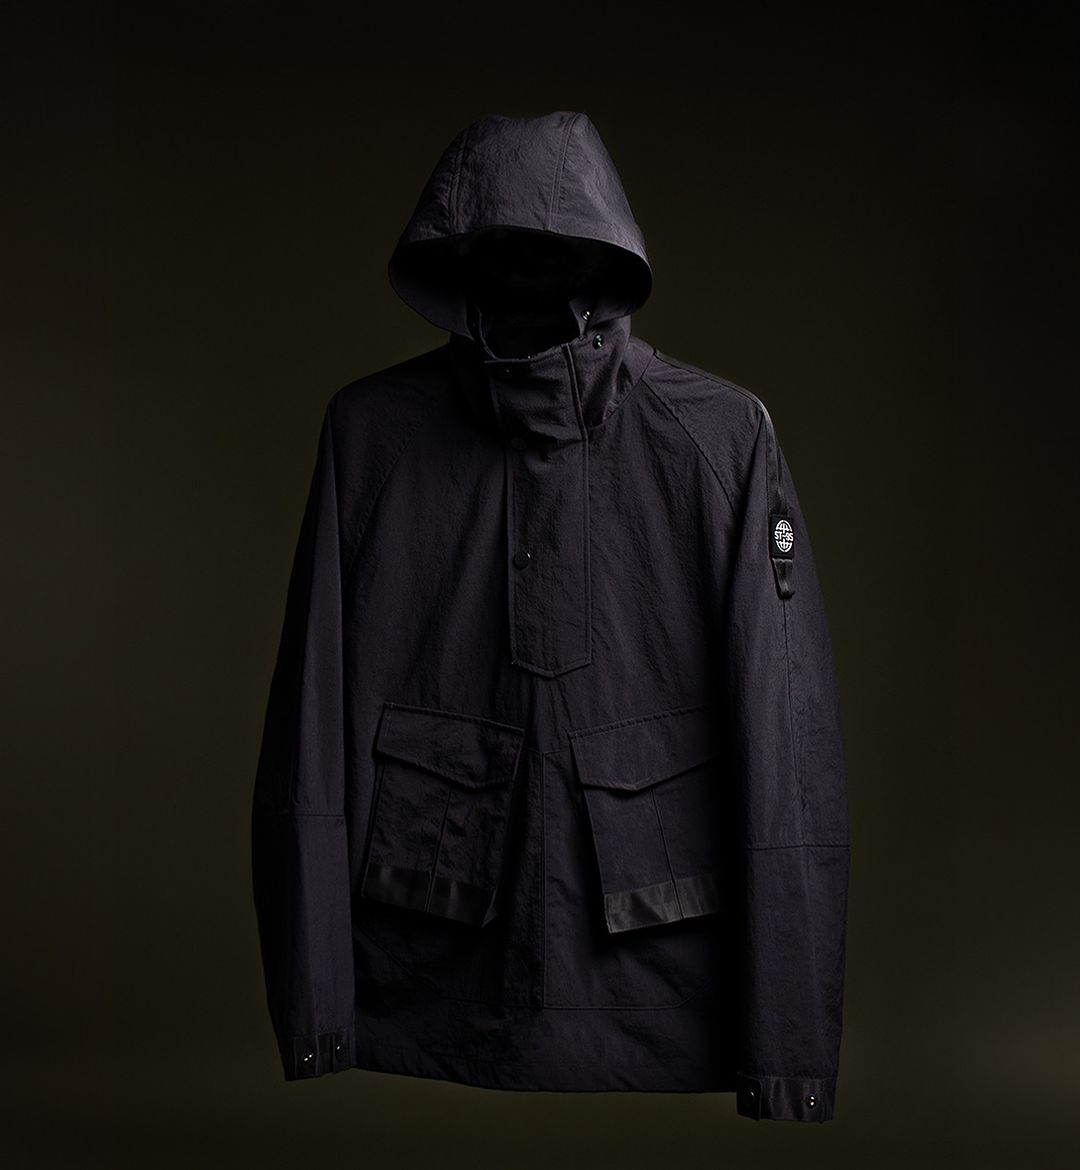 It doesn’t get much better than the ST95 Proximity Smock Jackey, rollaway hood and inspired by rocket fuel handlers suits made with recycled canvas #st95 #stninetyfive #proximity #recycled #massimoosti #lefthandstudio